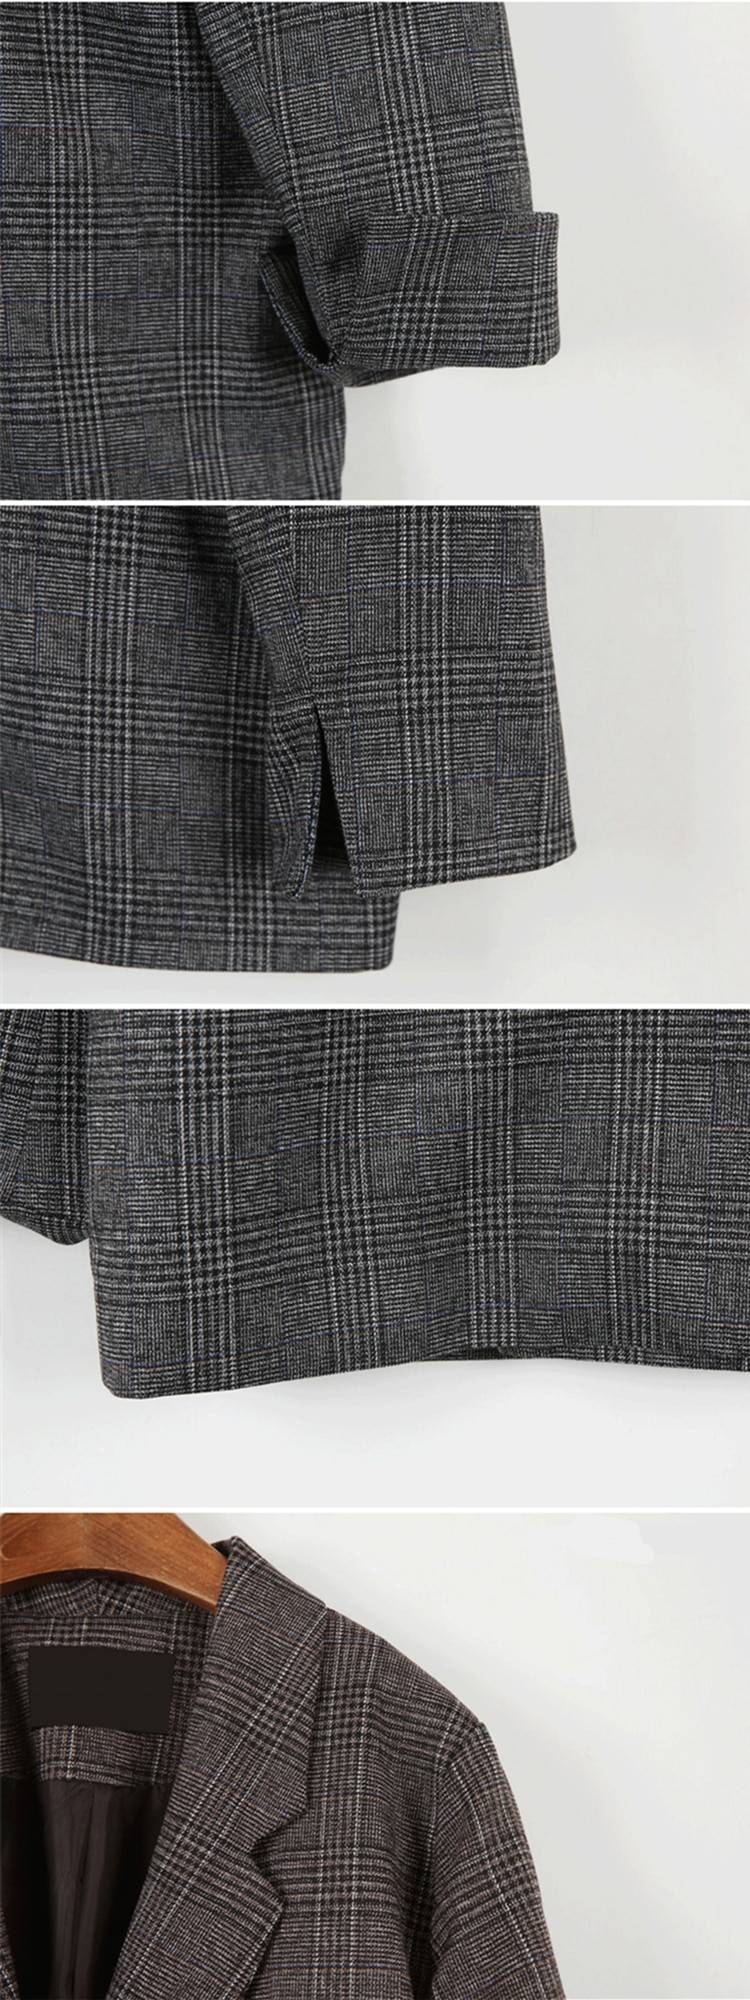 Plaid double breasted pockets formal jacket